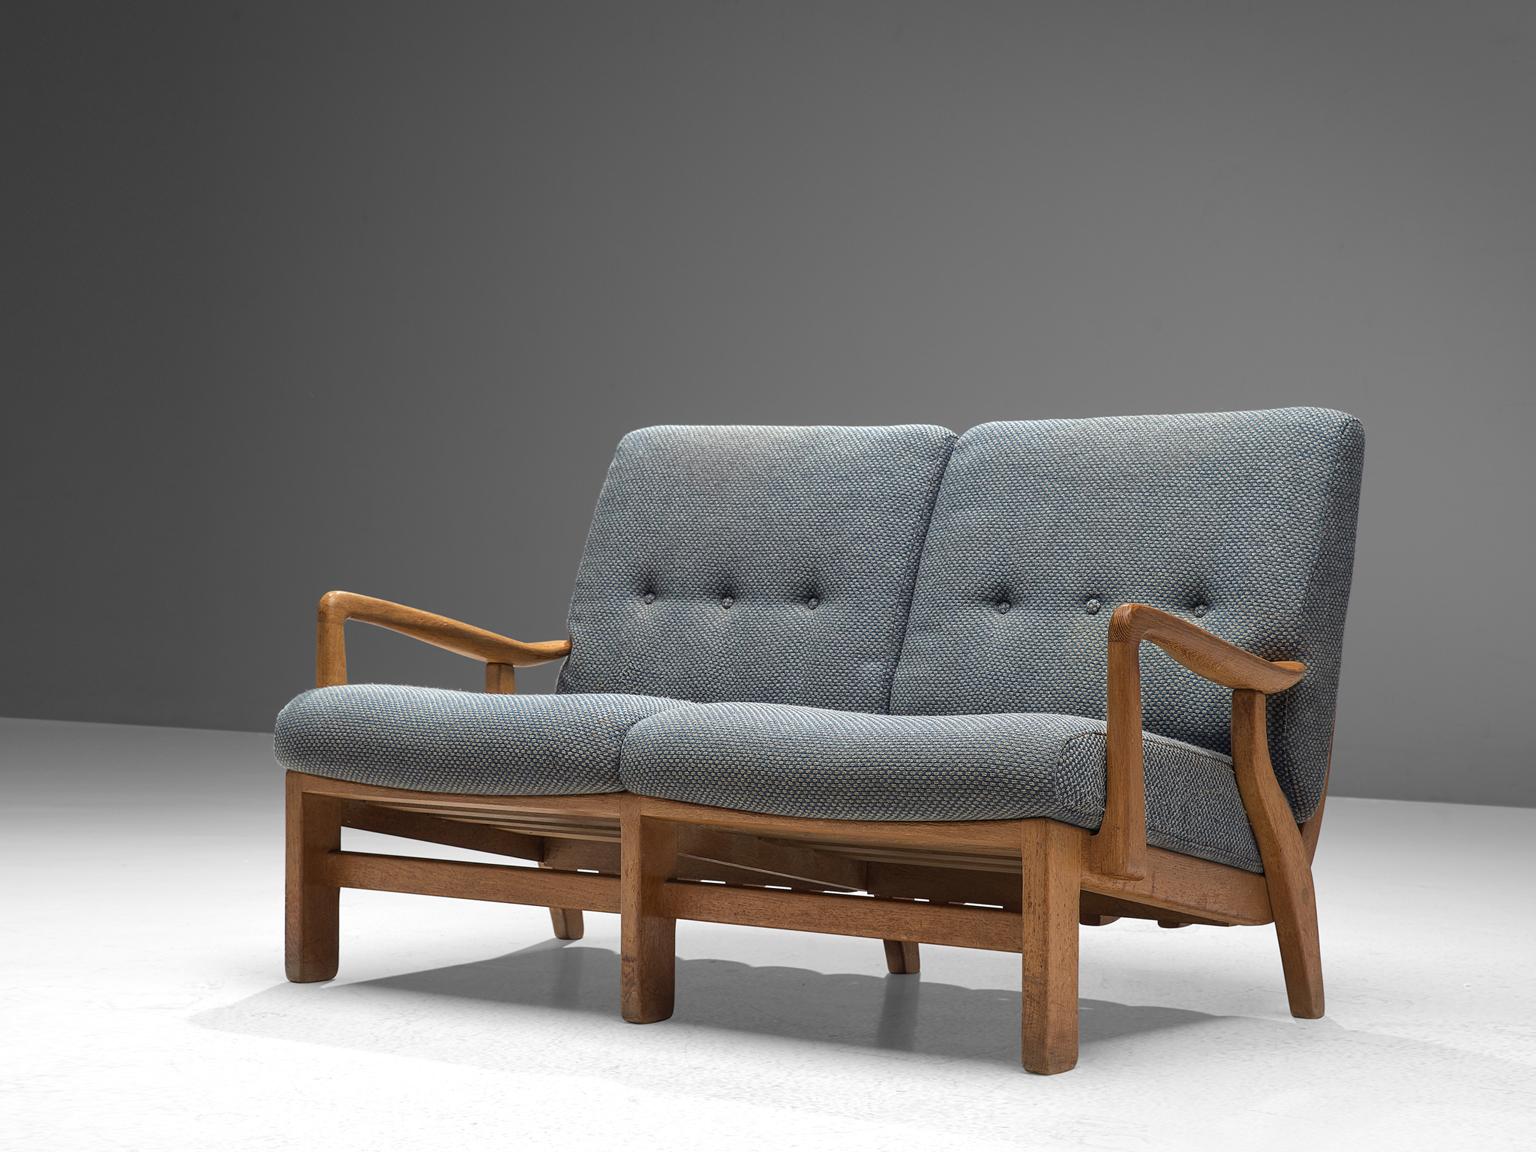 Guillerme et Chambron, sofa, oak and fabric, France, 1960s. 

Beautiful two-seat settee by Guillerme and Chambron, in solid oak with the typical characteristic decorative details at the back and sculpted forms of the legs. The thick, pastel blue